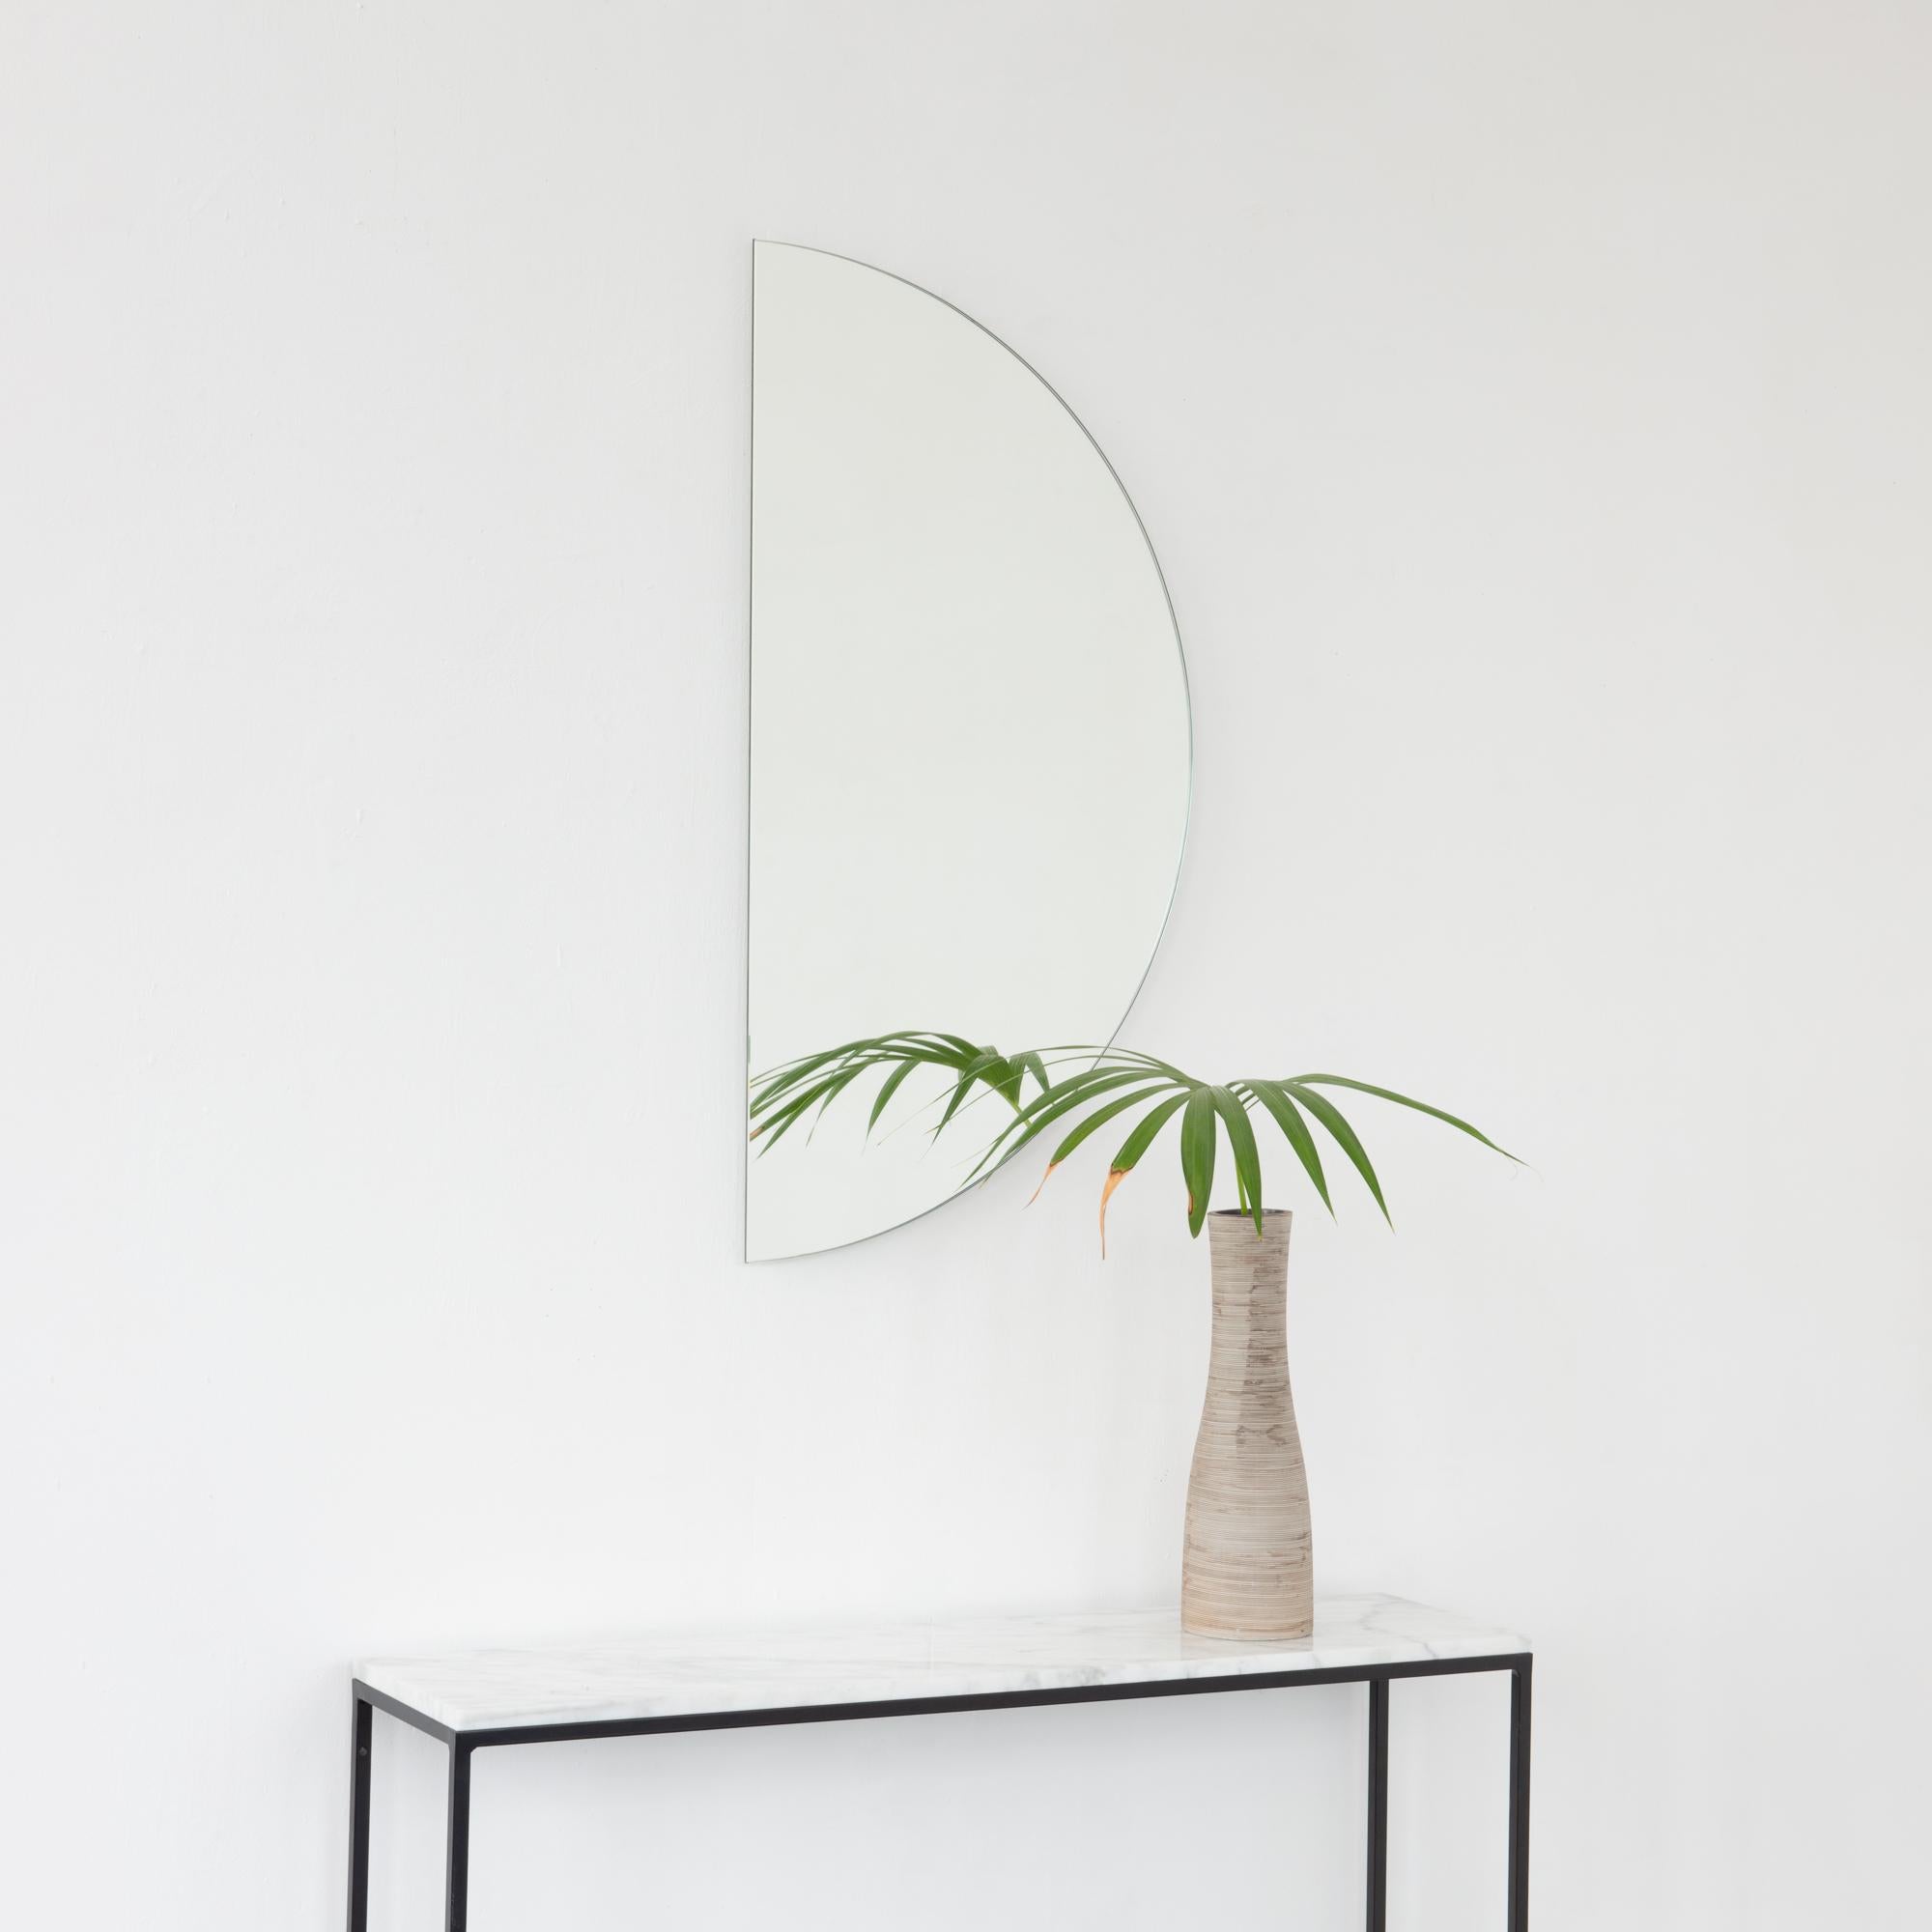 Minimalist Luna™ half-moon frameless mirror with a floating effect. Fitted with a quality hanging system for a flexible installation in 4 different directions. Designed and made in London, UK.

Our mirrors are designed with an integrated French